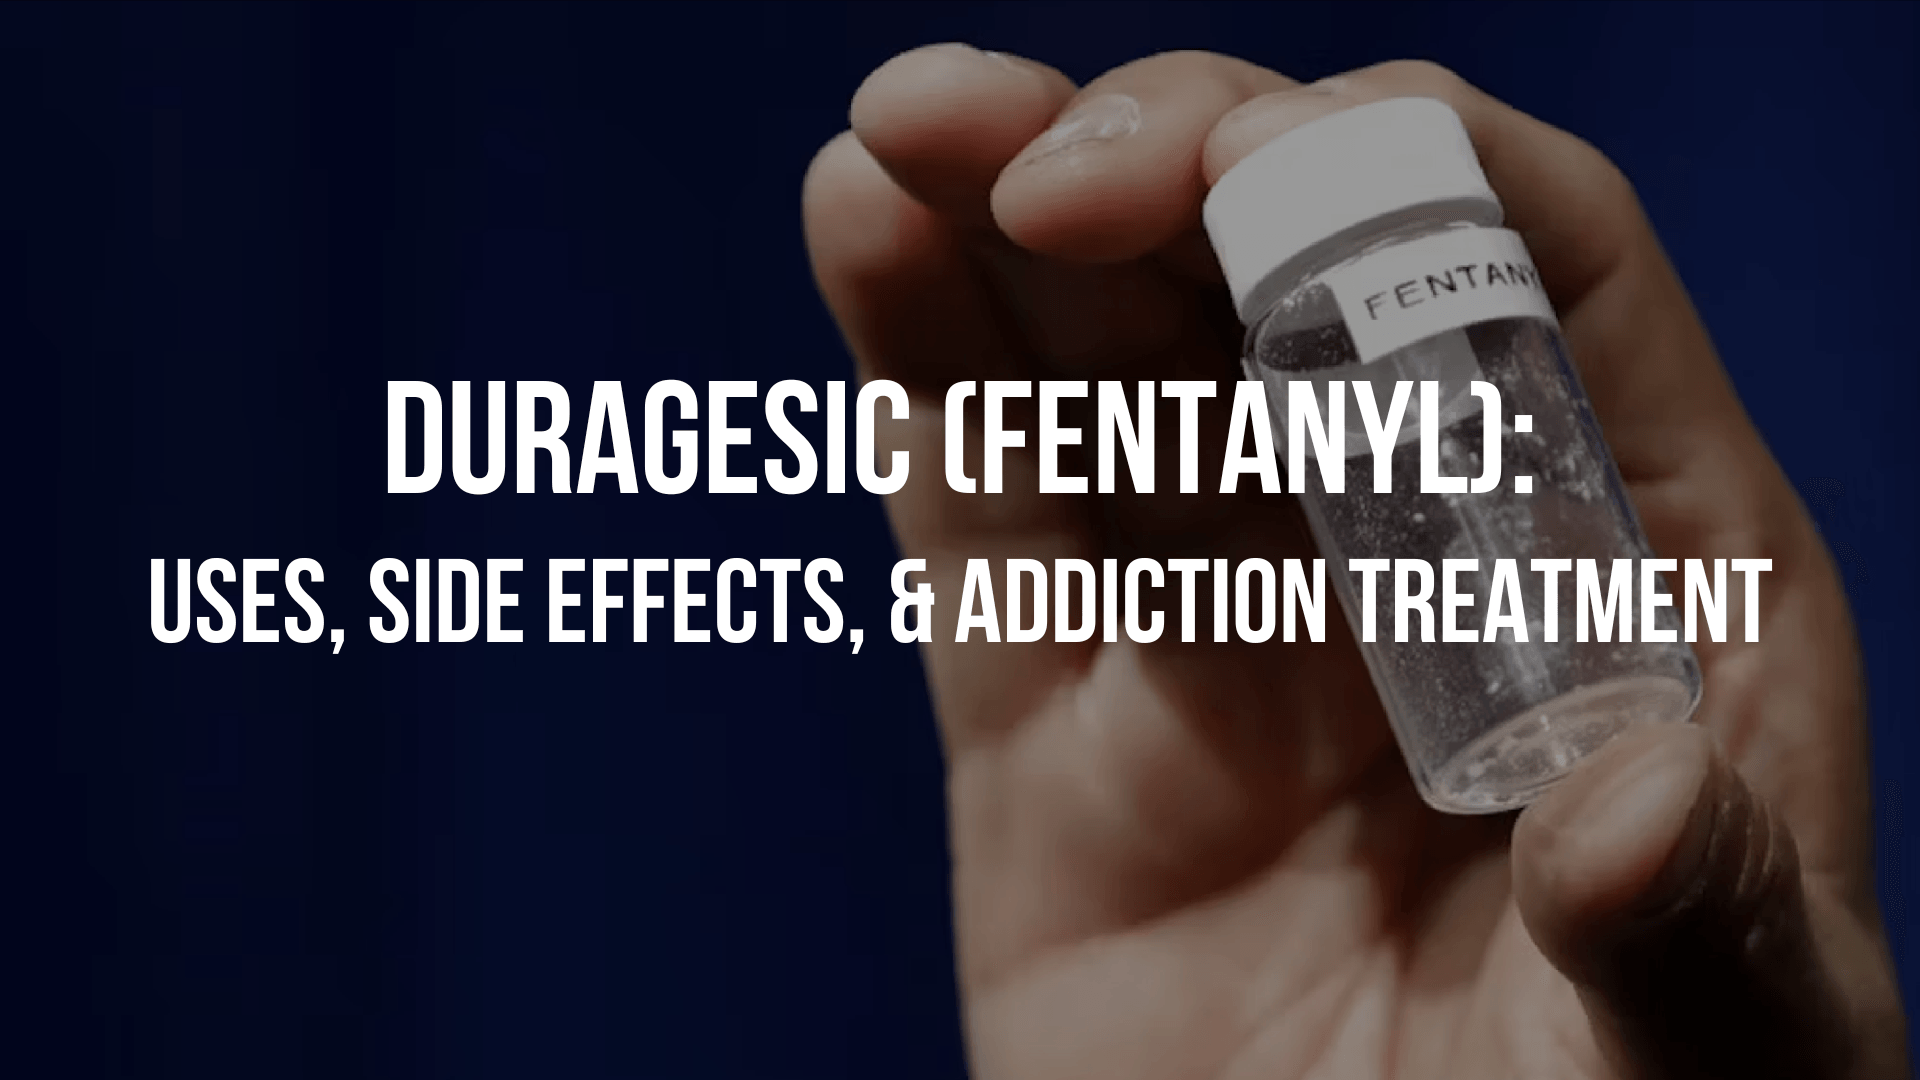 A Crash Course on Duragesic (Fentanyl): Uses, Side Effects, & Addiction Treatment